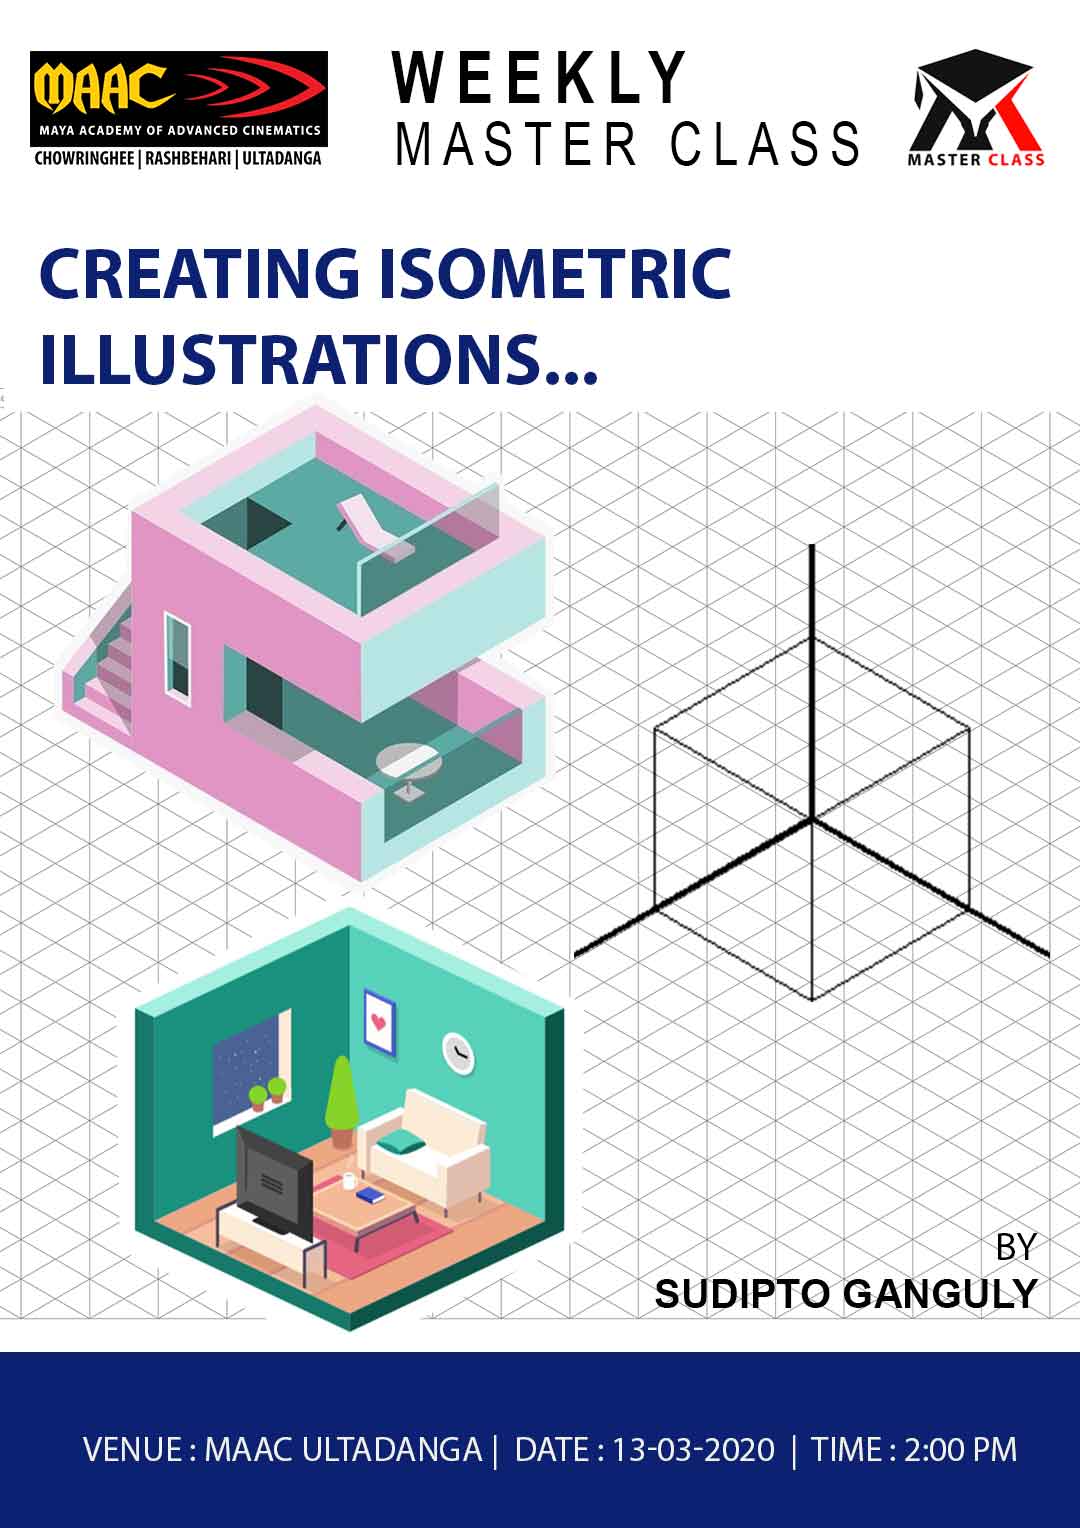 Weekly Master Class on Creating Isometric Illustrations